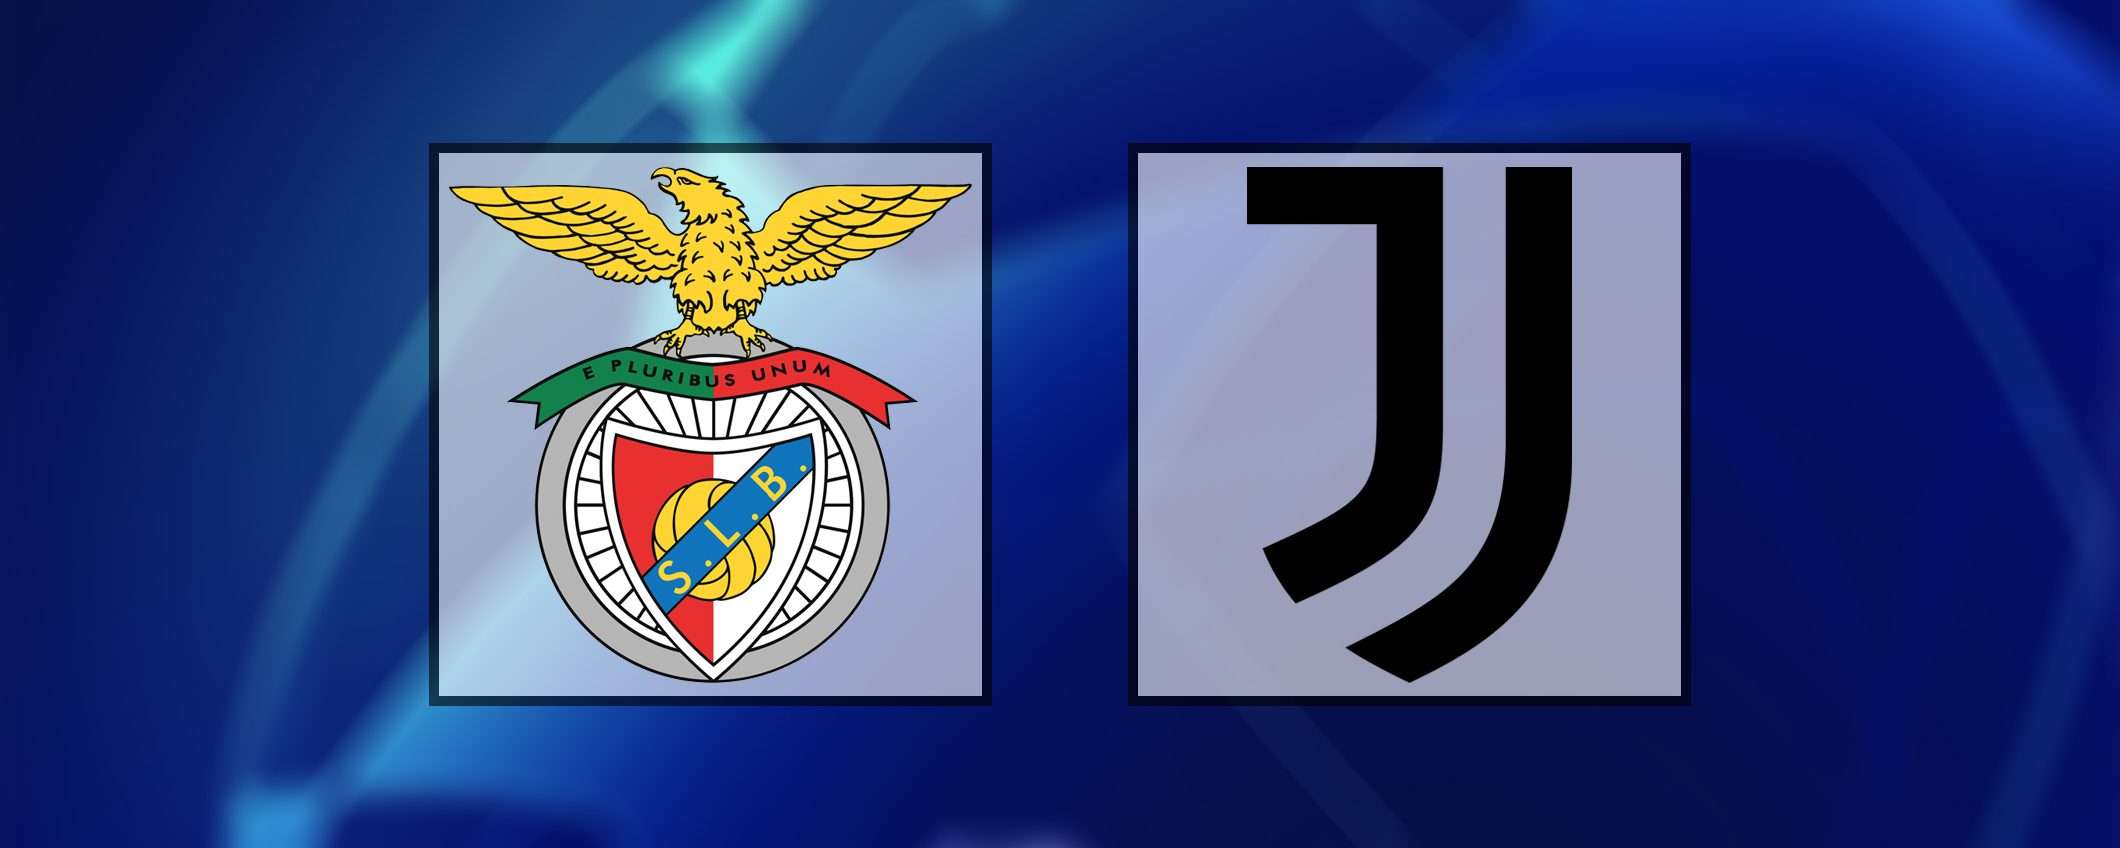 Come vedere Benfica-Juventus in streaming